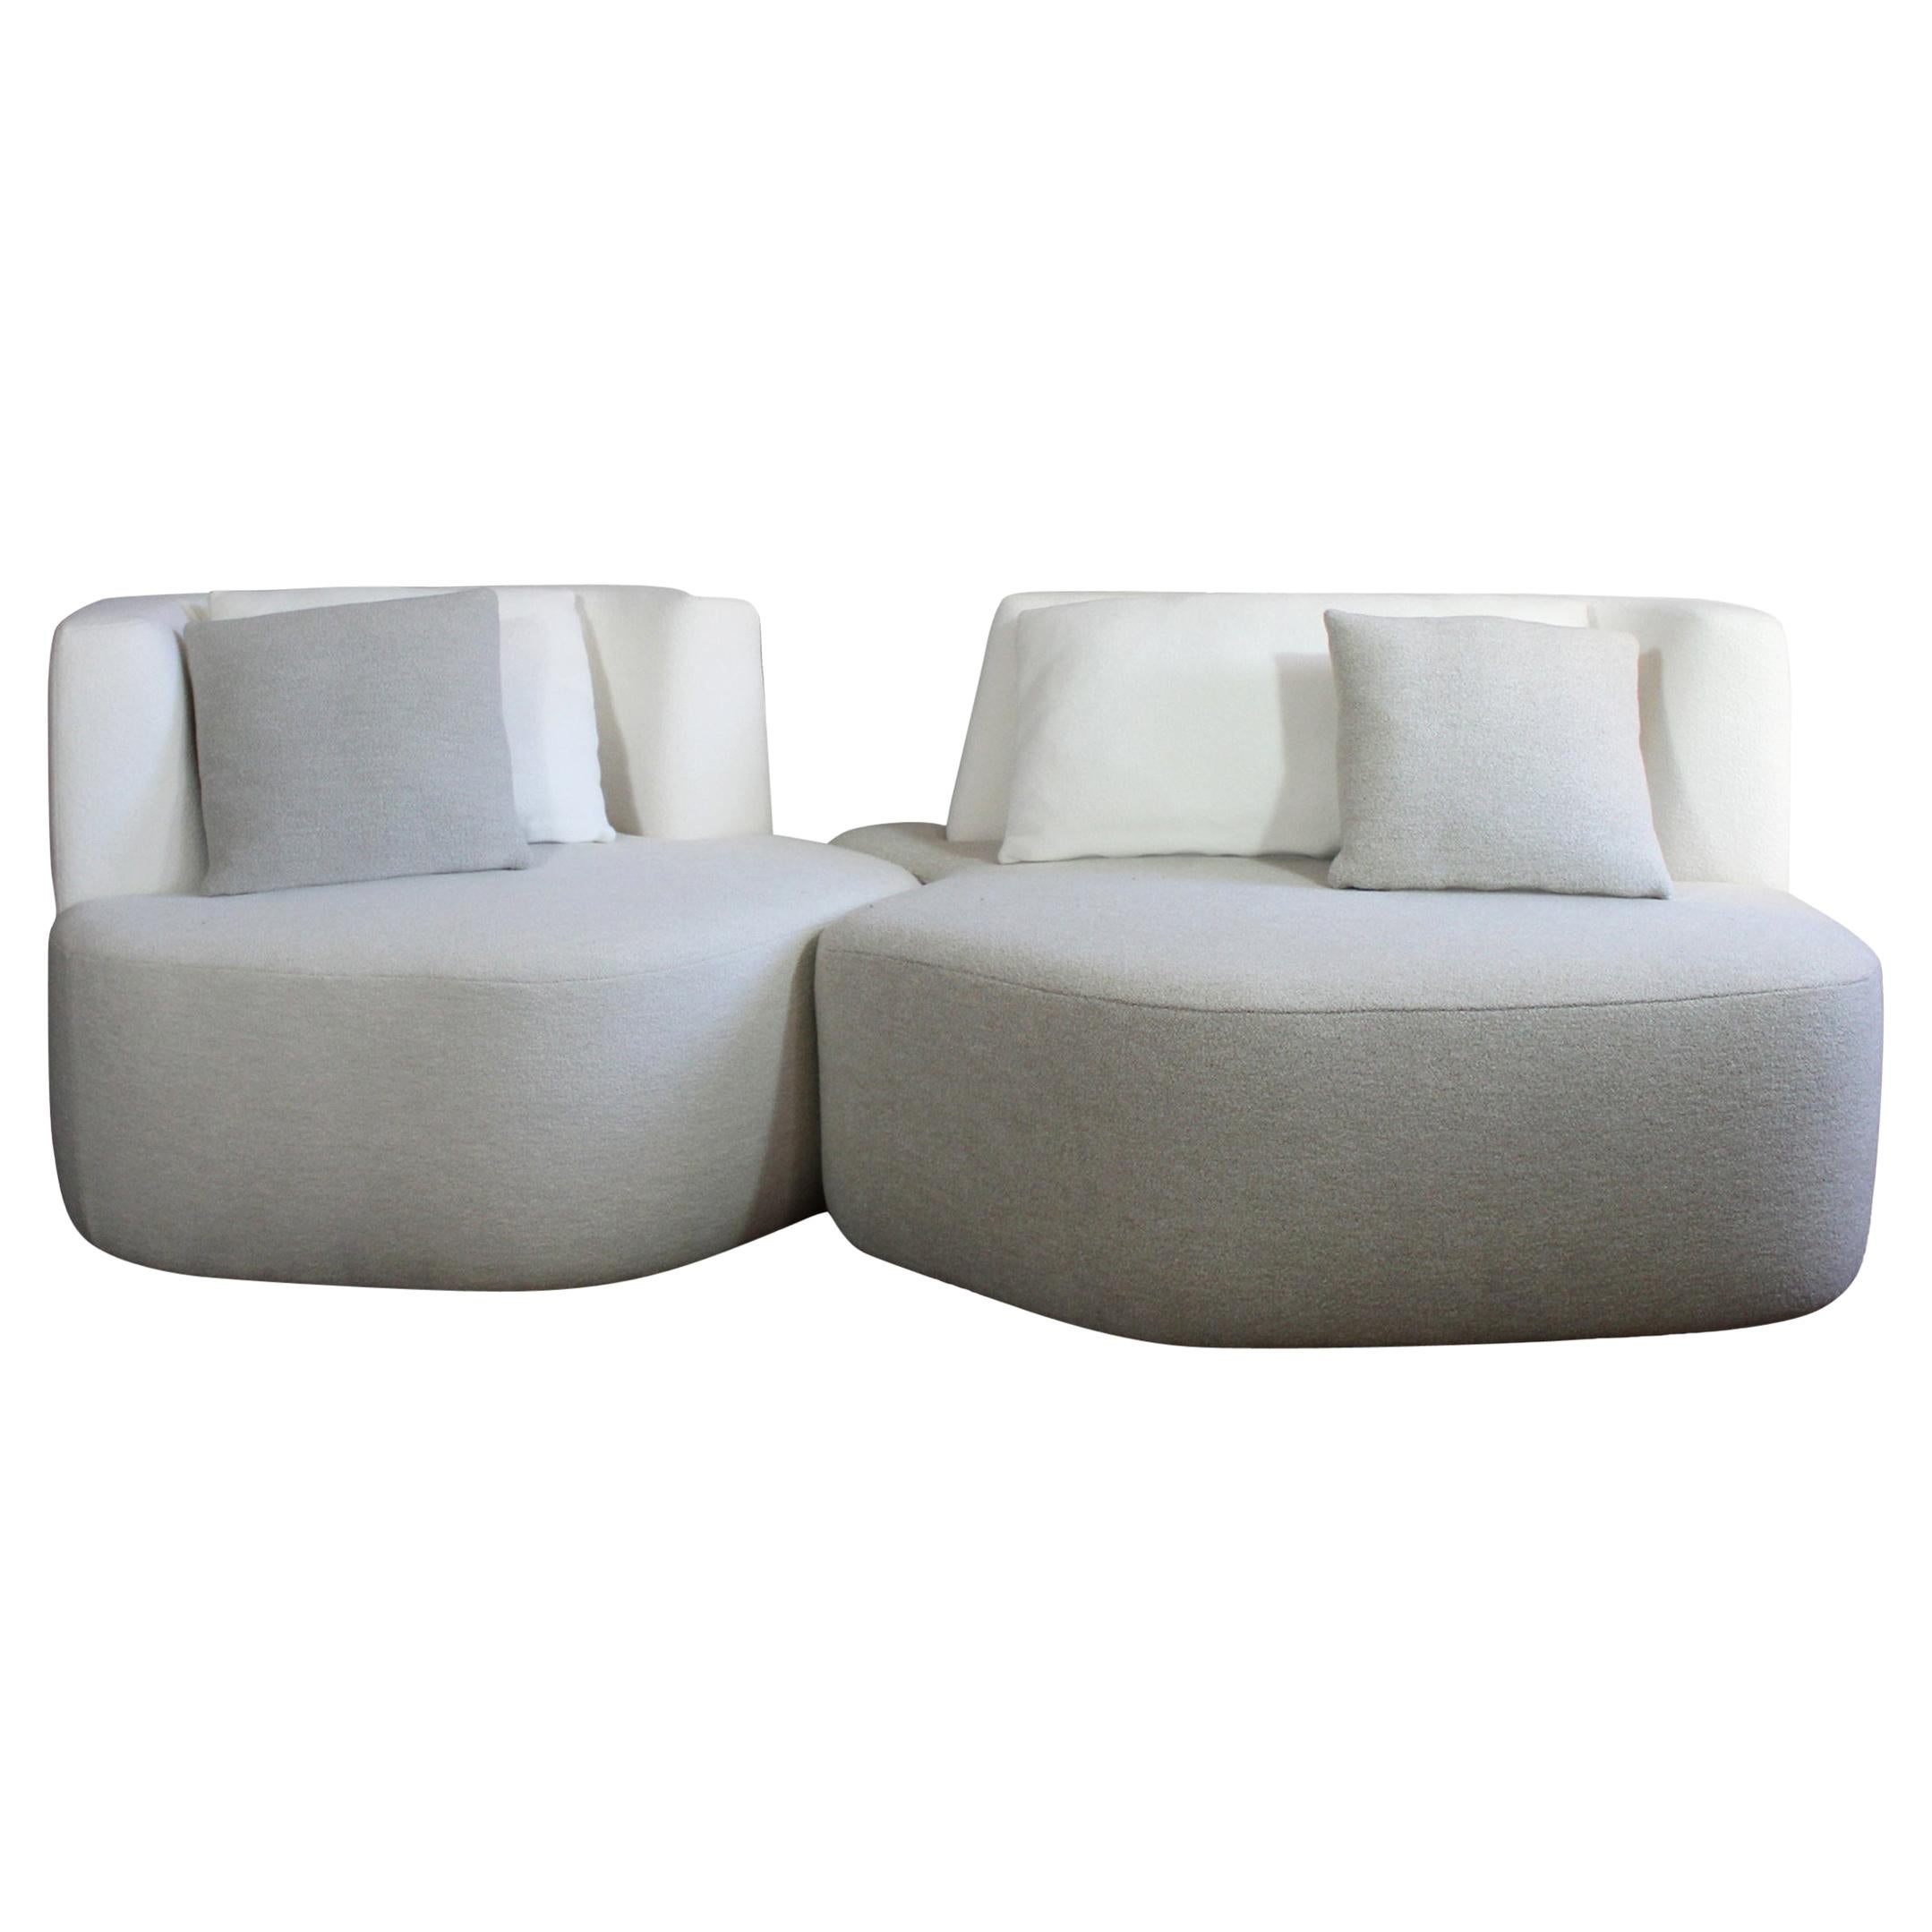 Sofa in White Cream Wool 2 Modules Made in France Customizable For Sale